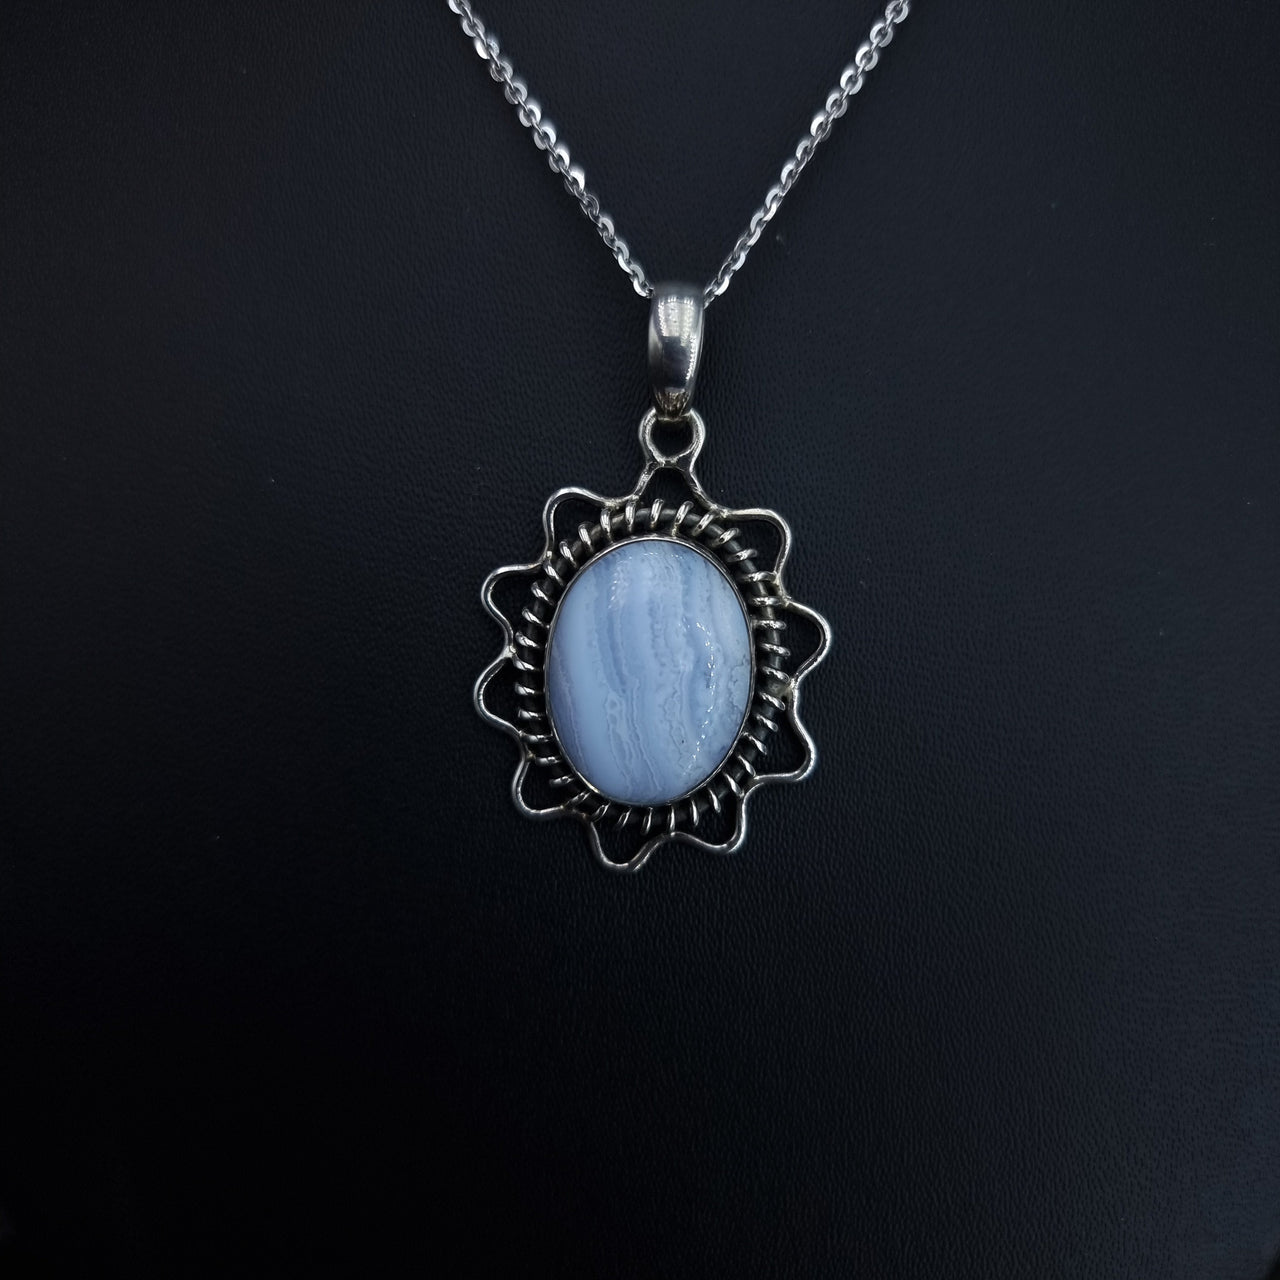 Natural Blue Lace Agate Stone Necklace